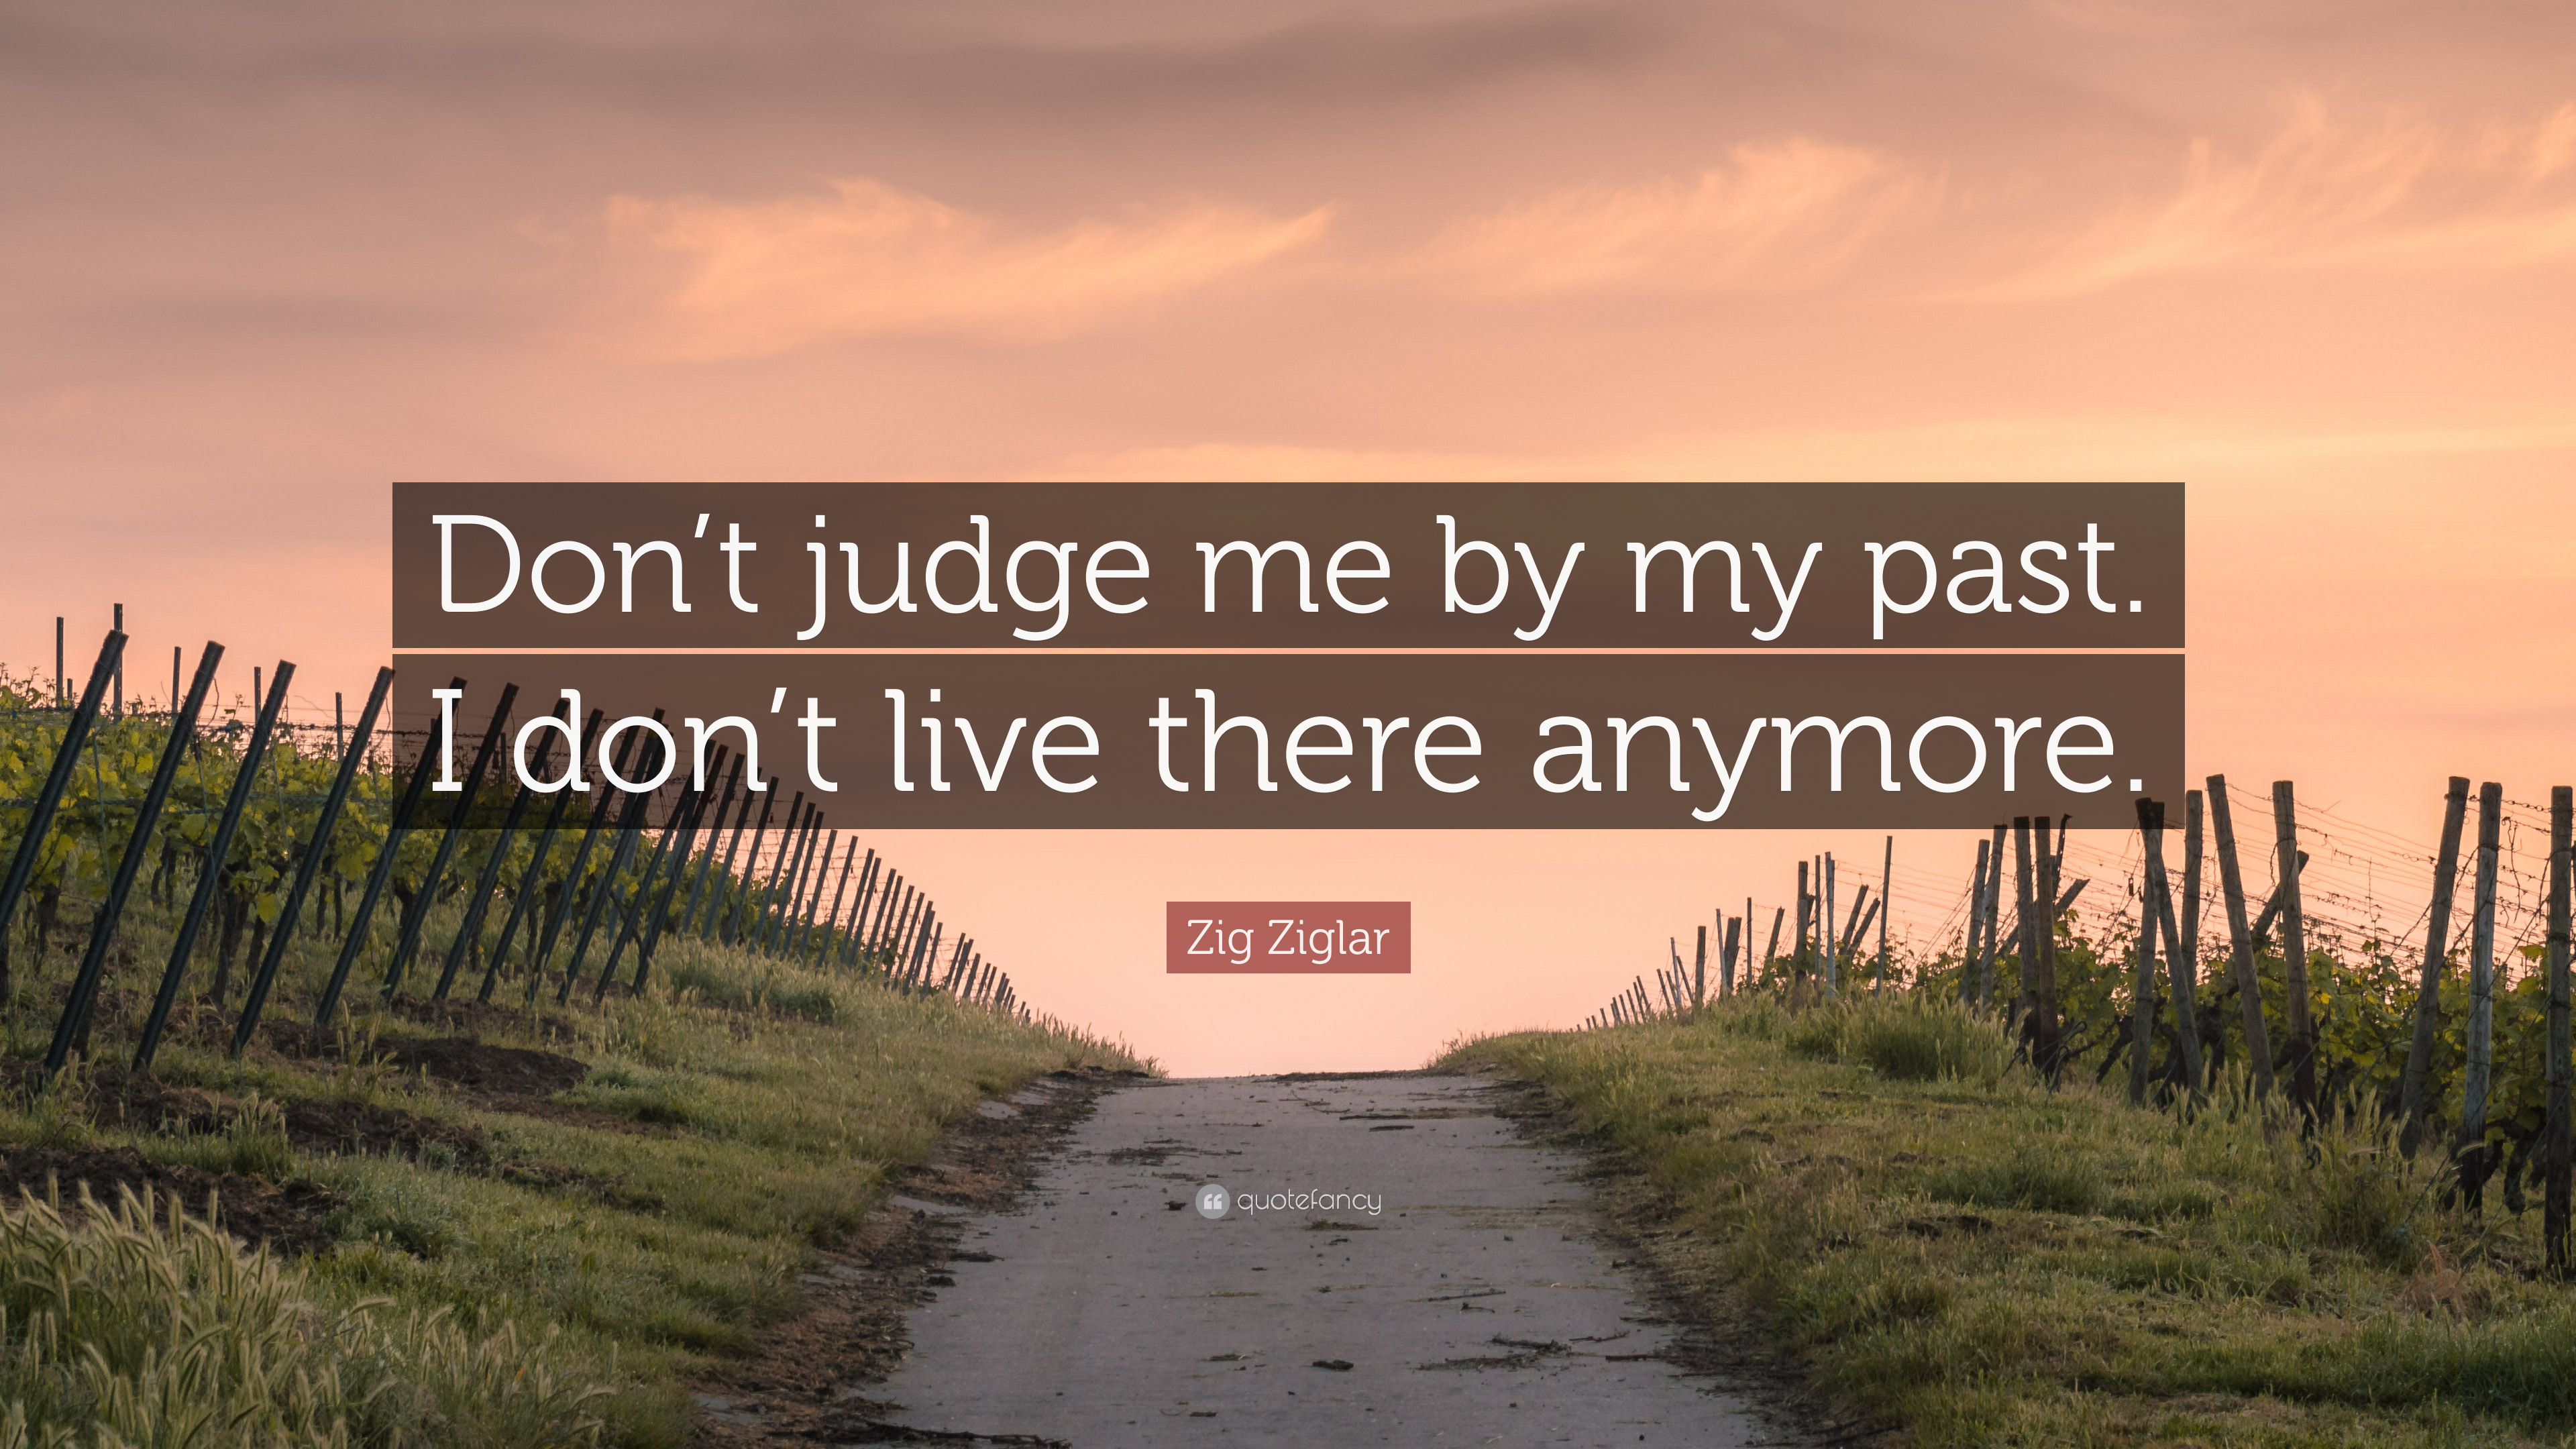 Zig Ziglar Quote: “Don't judge me by my past. I don't live there anymore.”